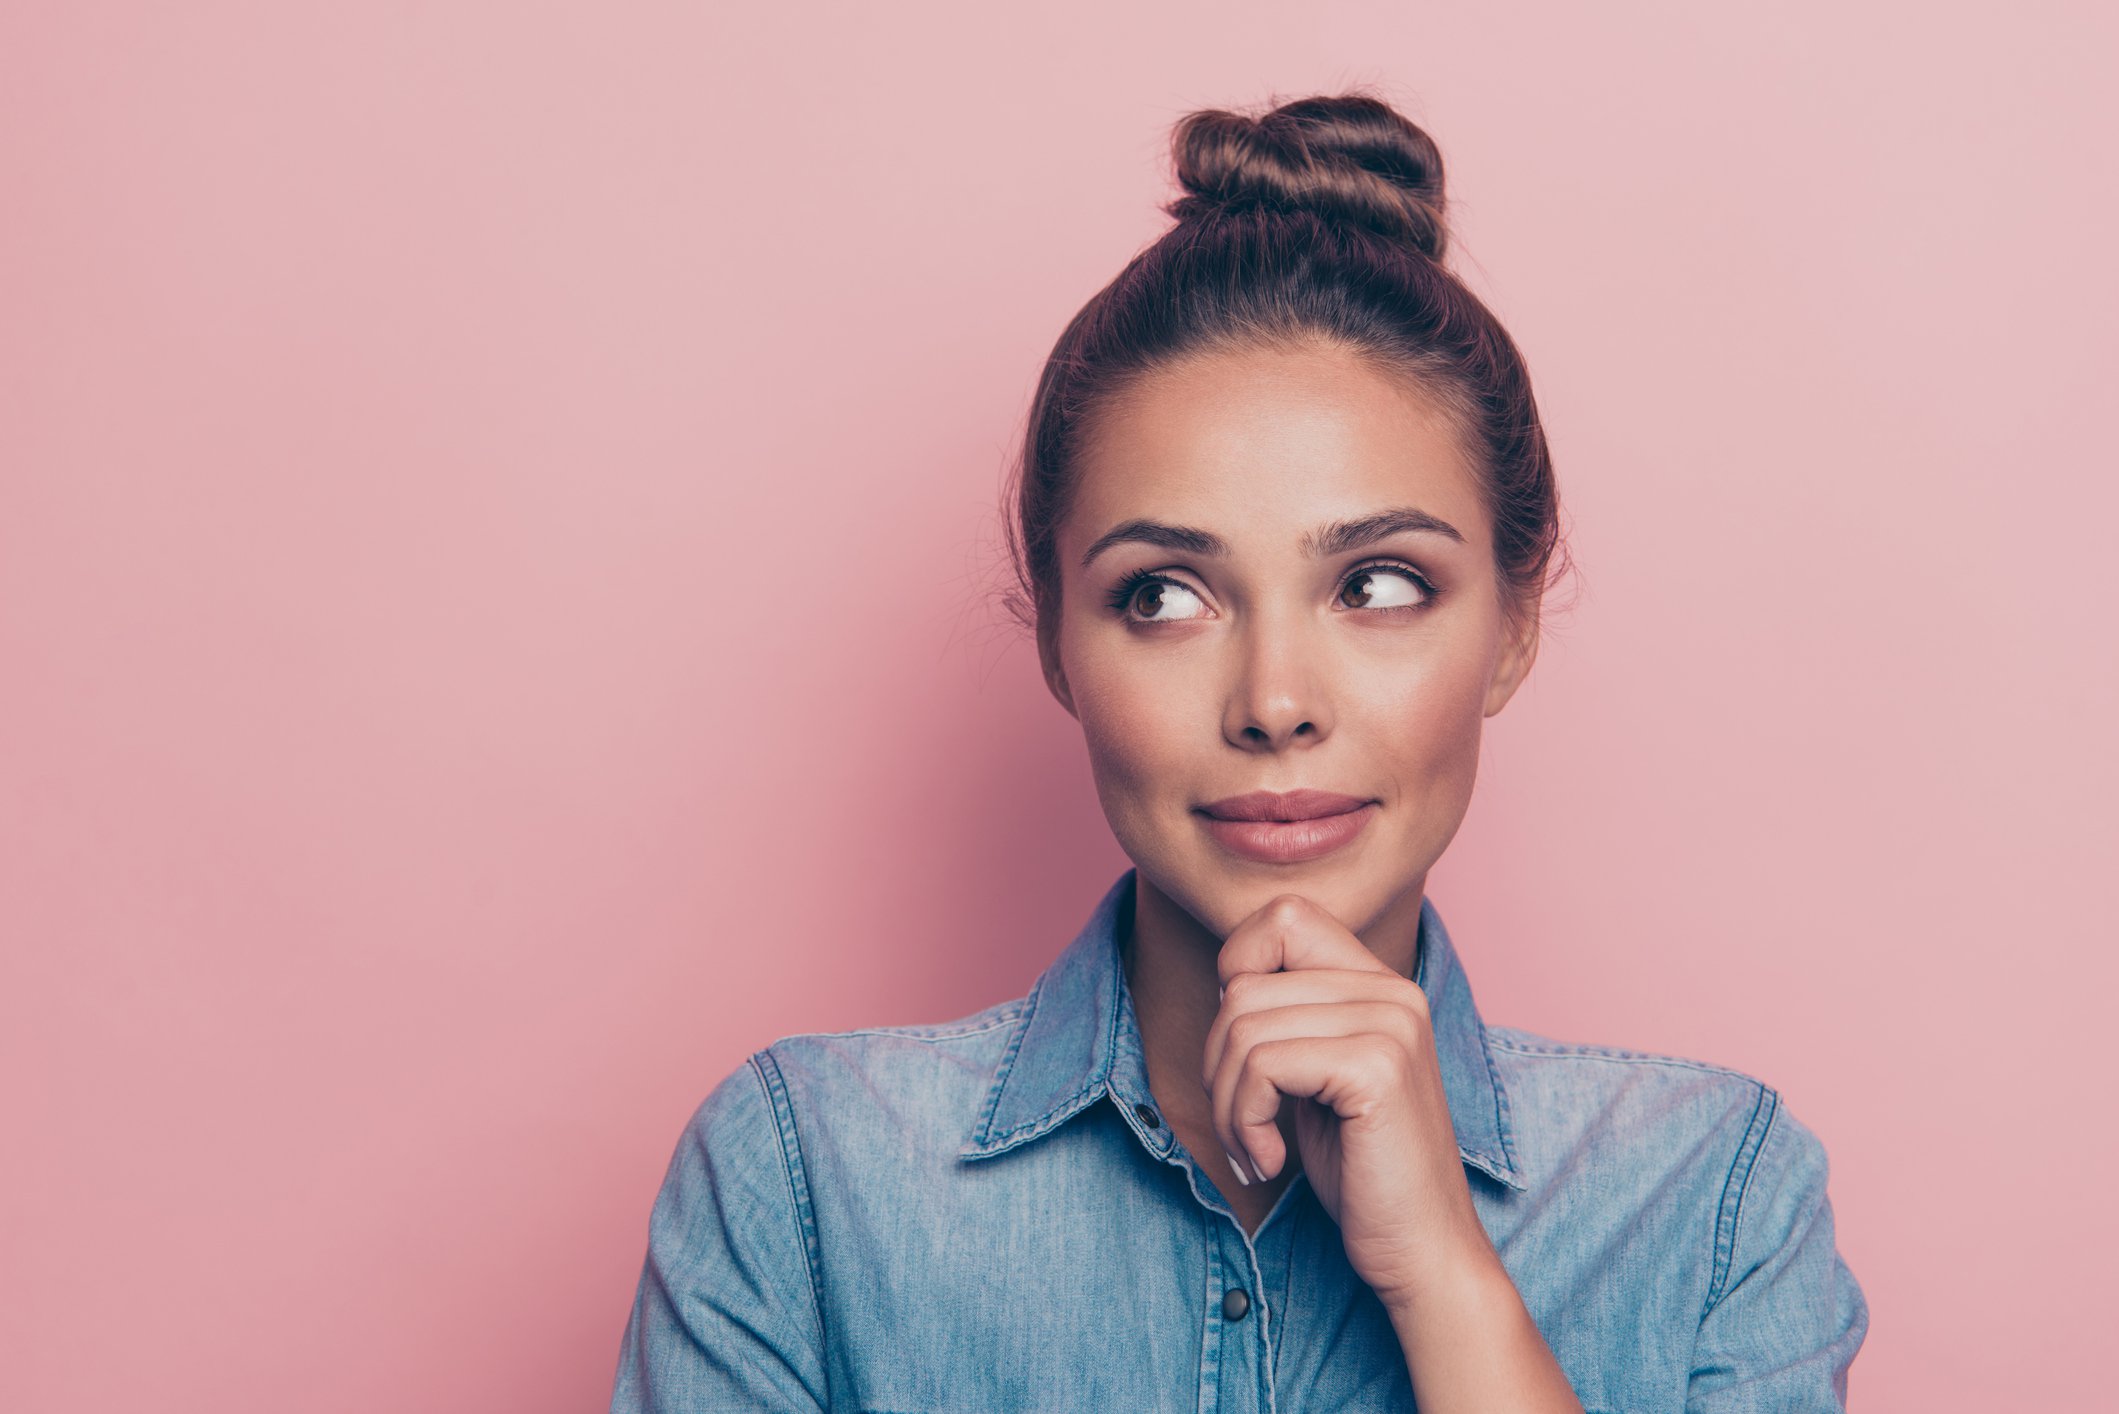 Portrait of curious woman on pink background